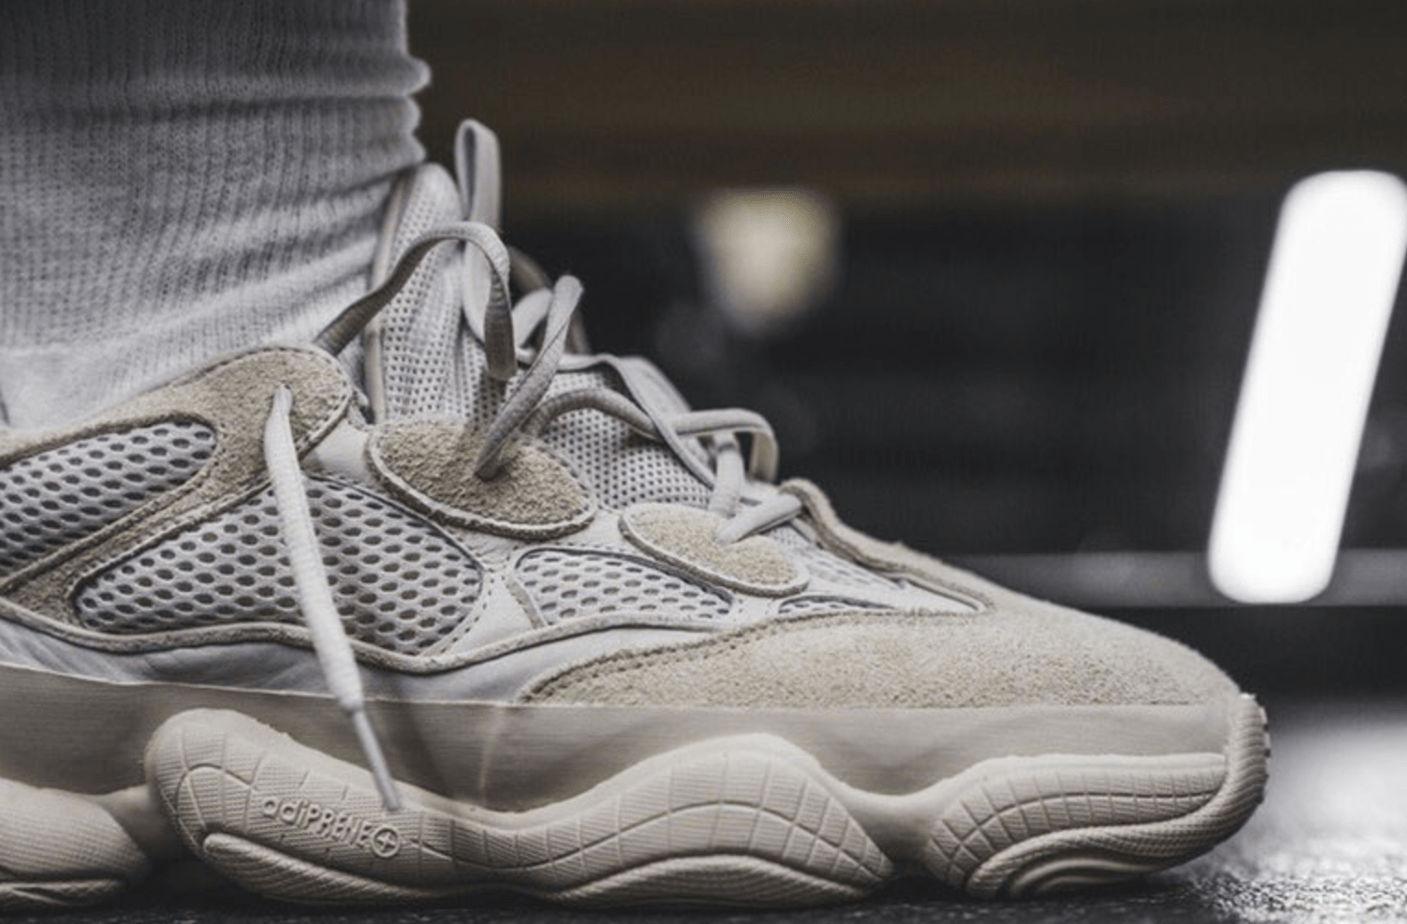 Take a Closer Look at the adidas Yeezy 500 